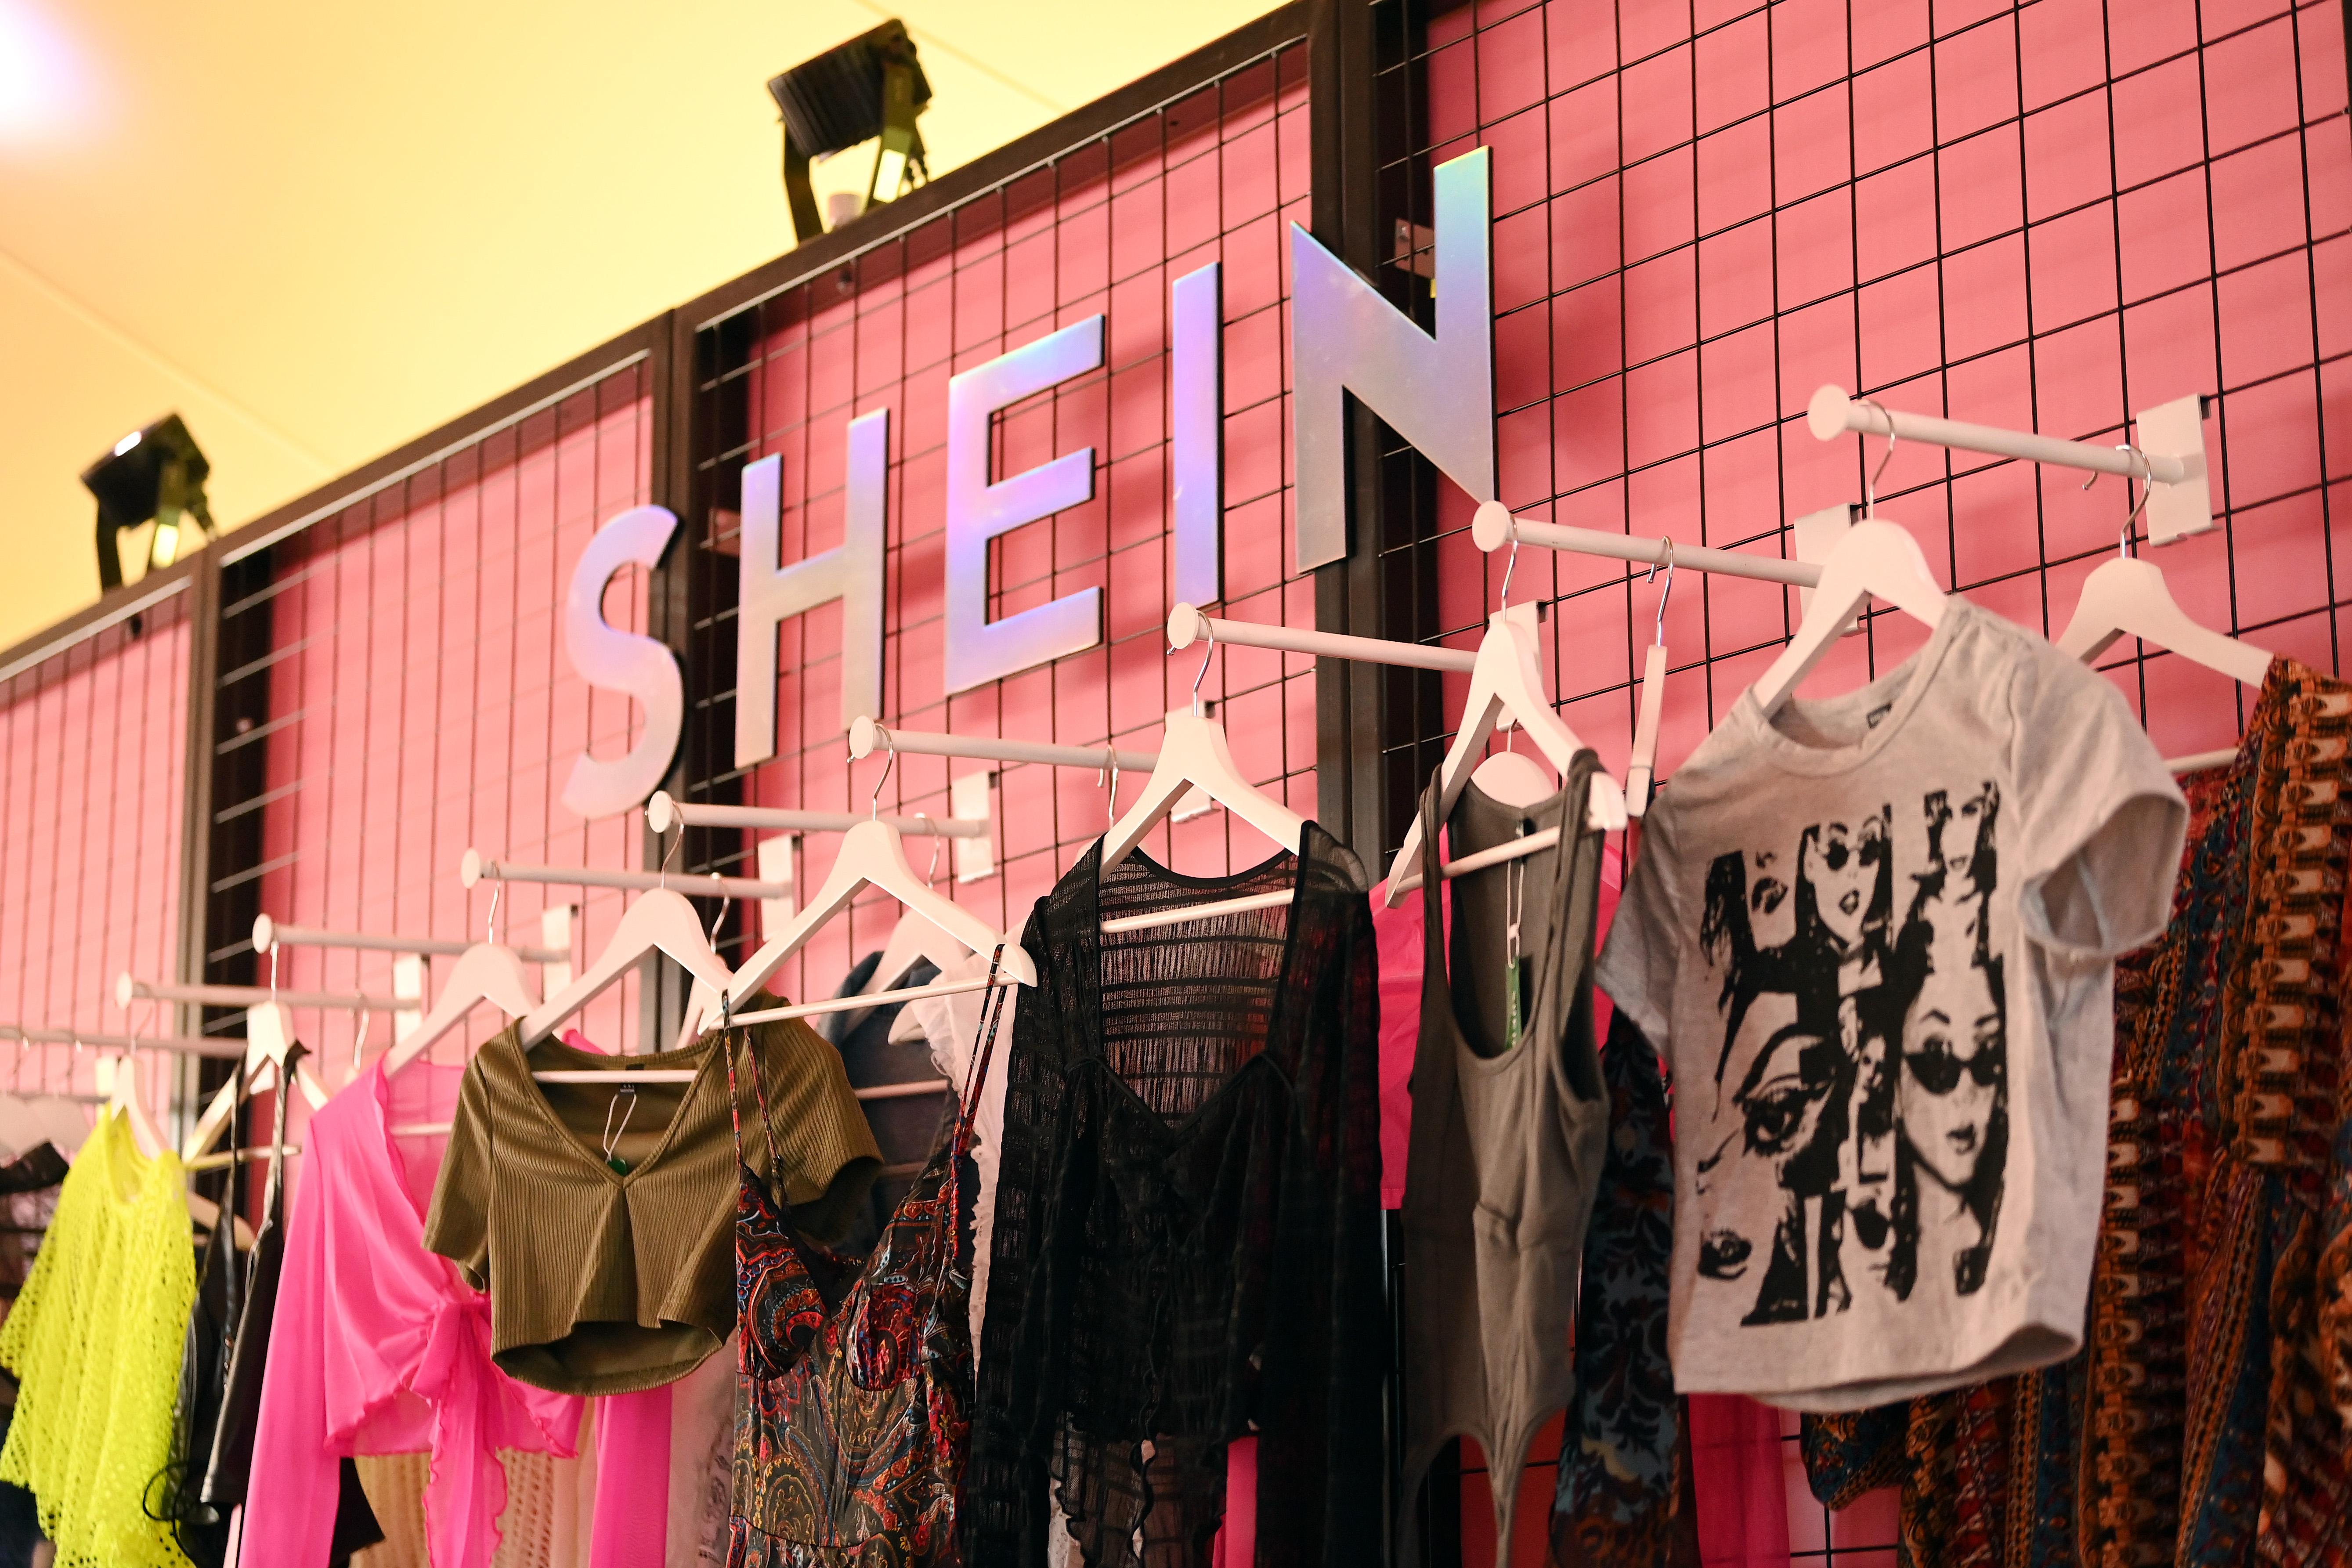 Shein IPO: What to know as the fast-fashion giant prepares to go public.